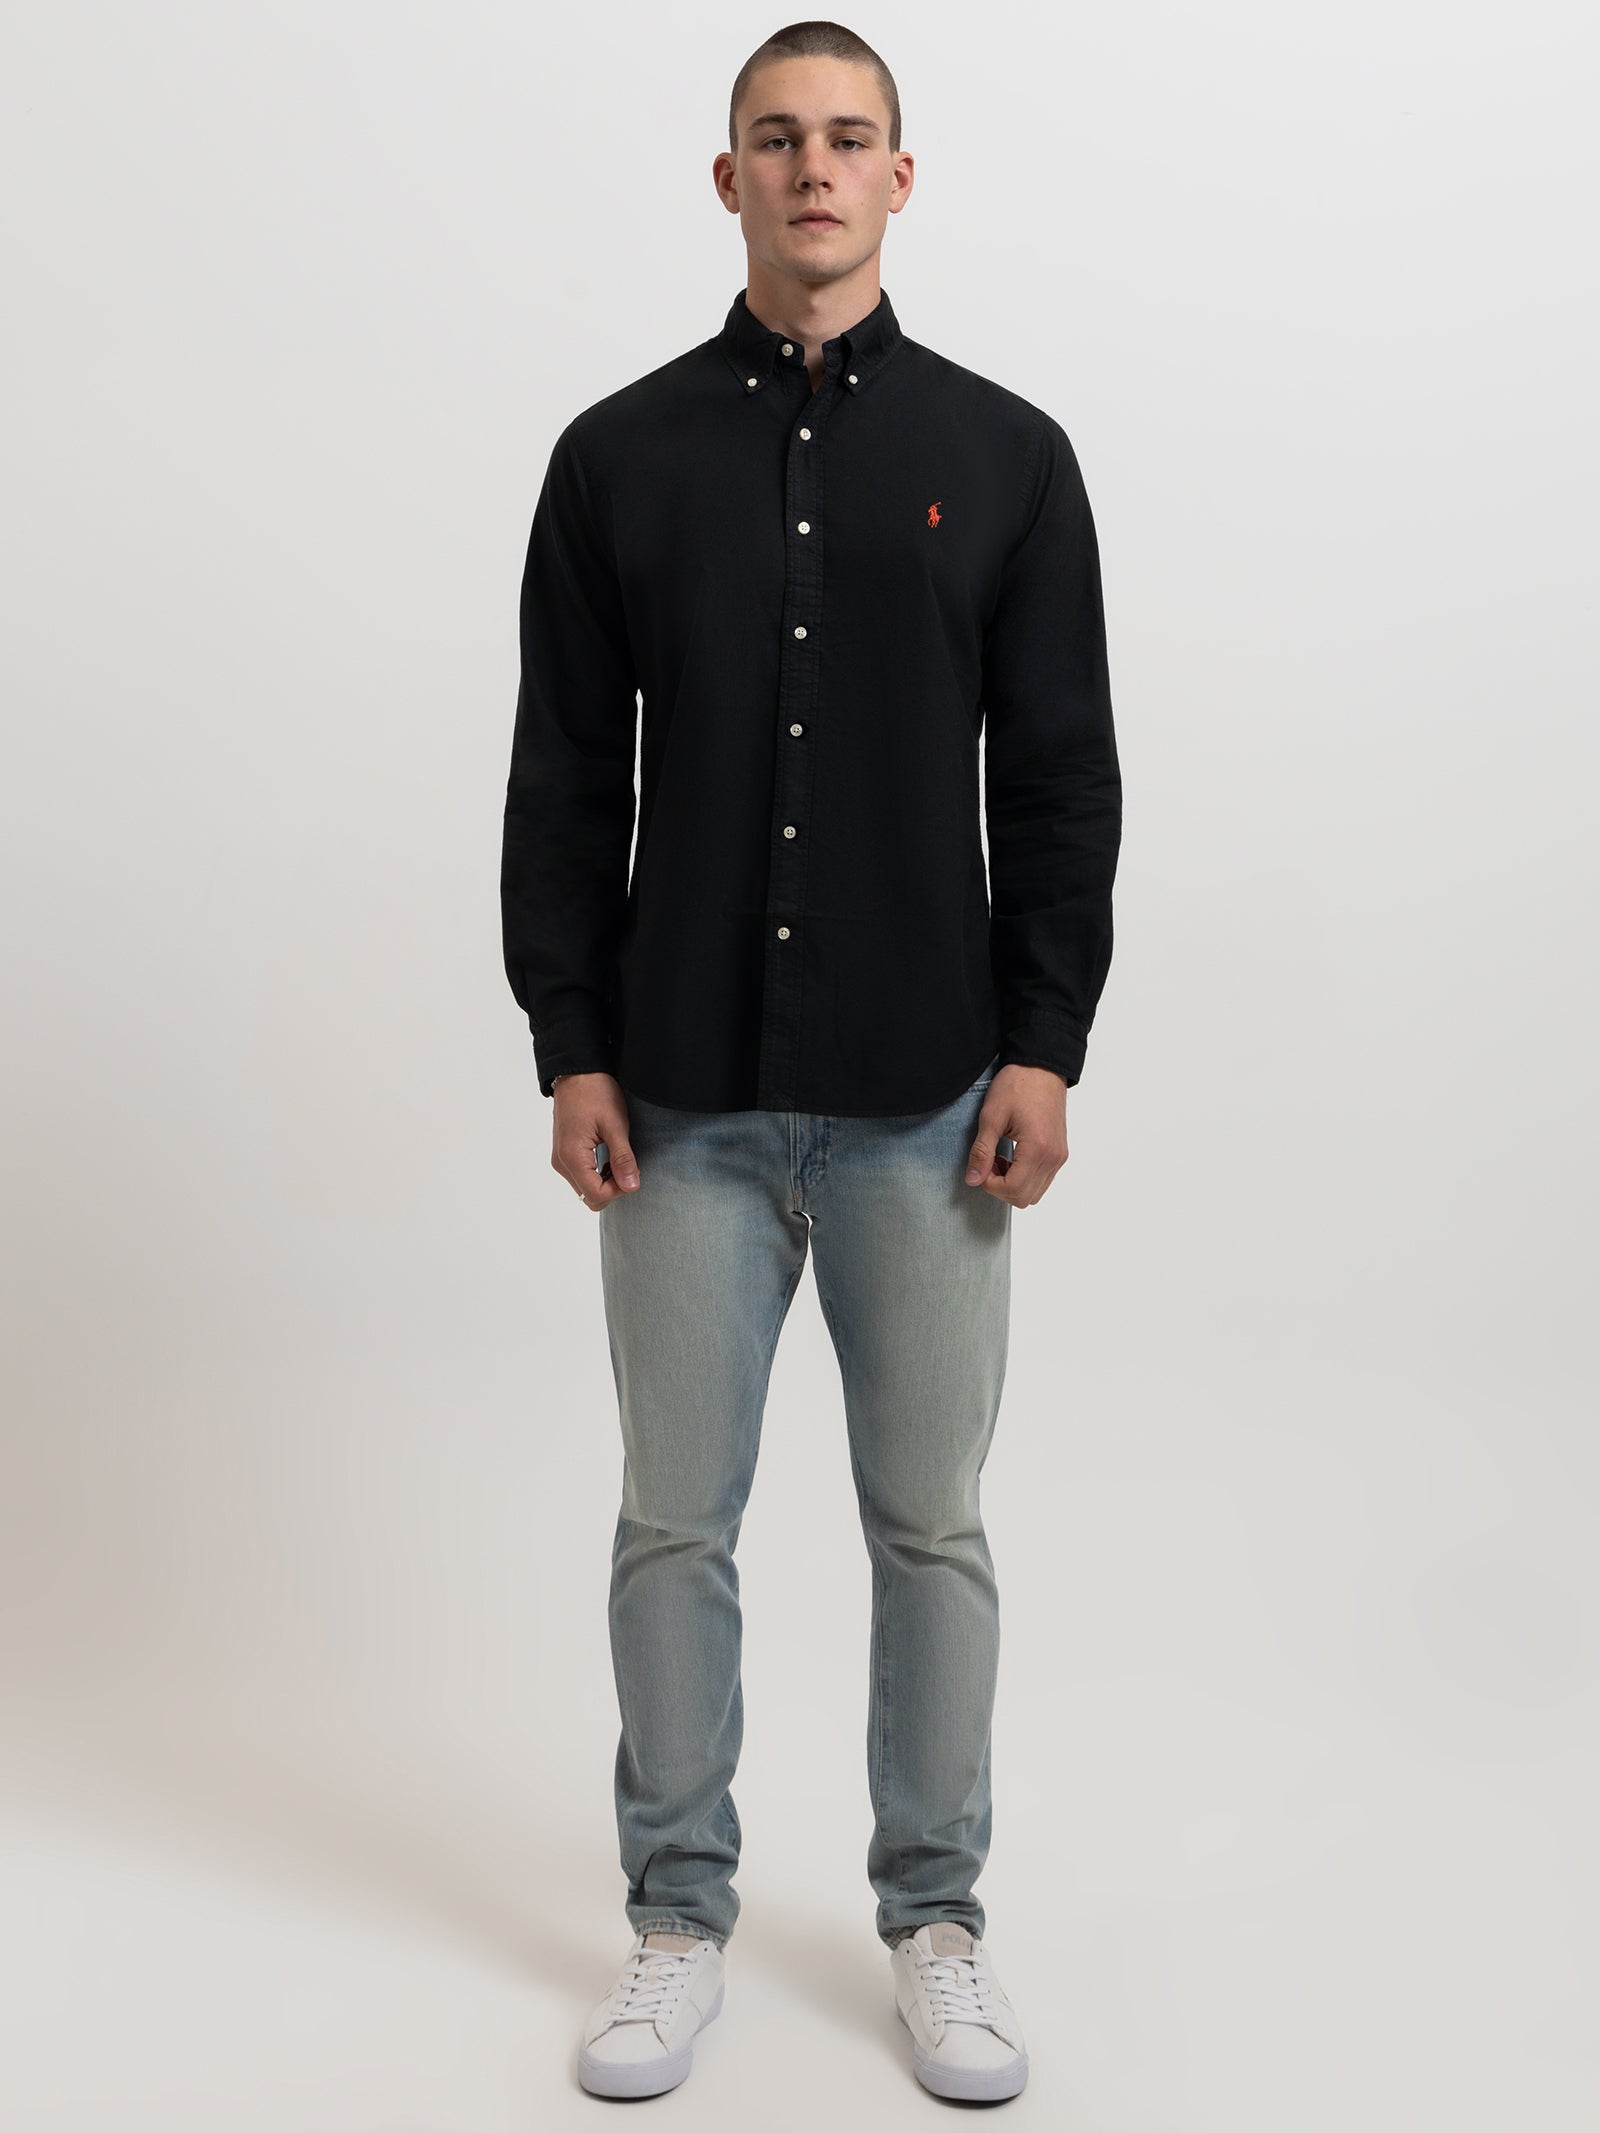 Long Sleeve Embroidered Shirt in Black